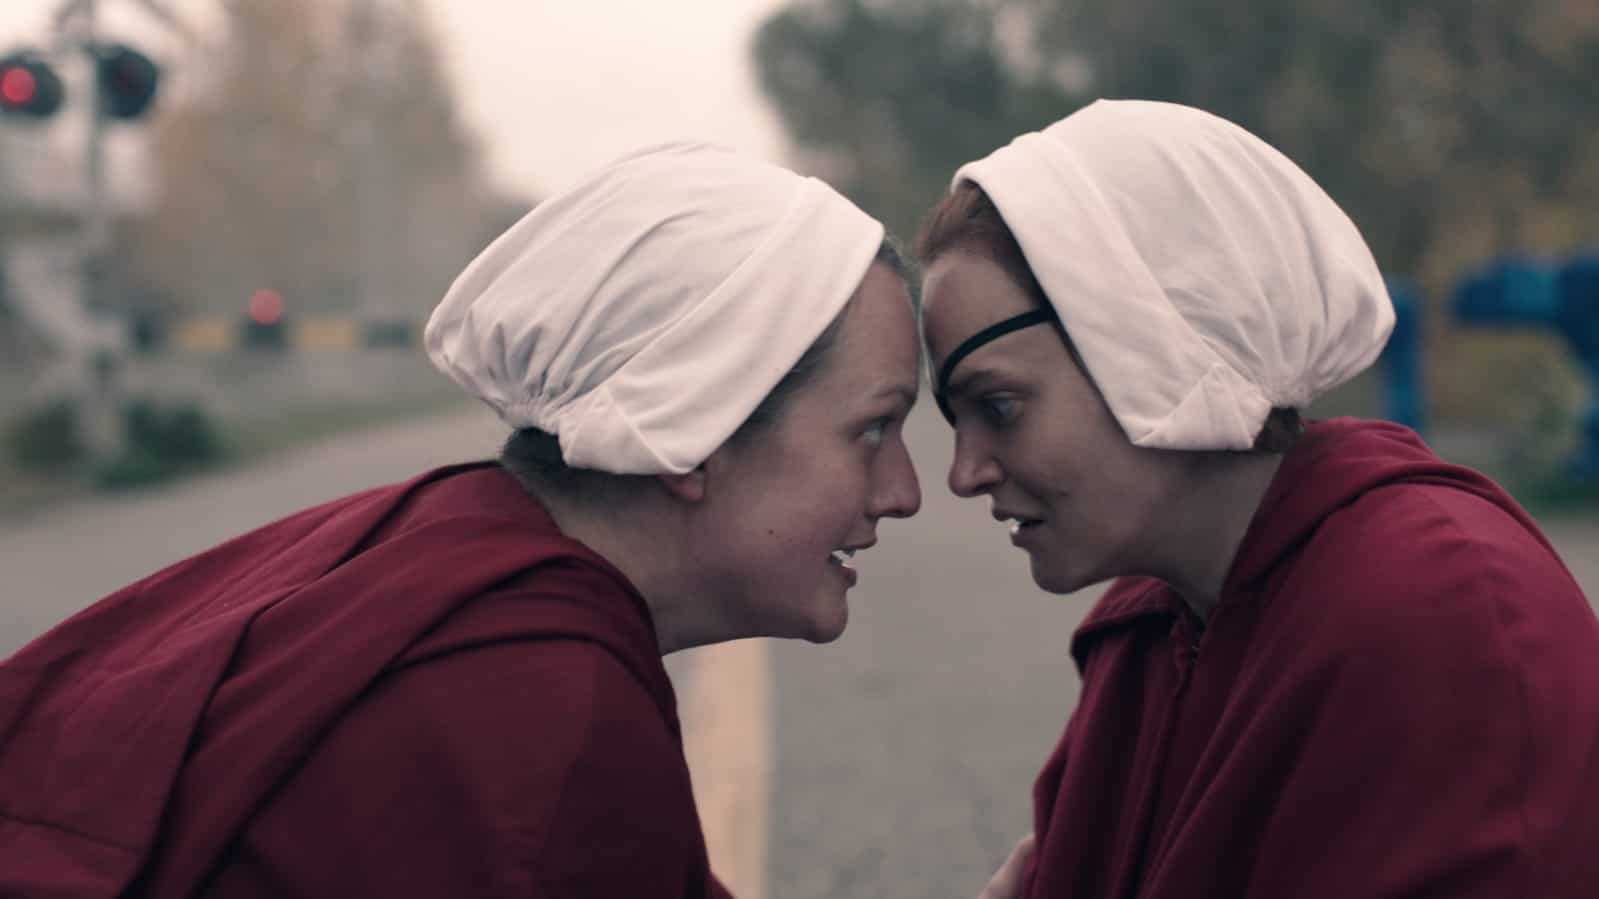 June (Elisabeth Moss) and Janine (Madeline Brewer) in The Handmaid's Tale